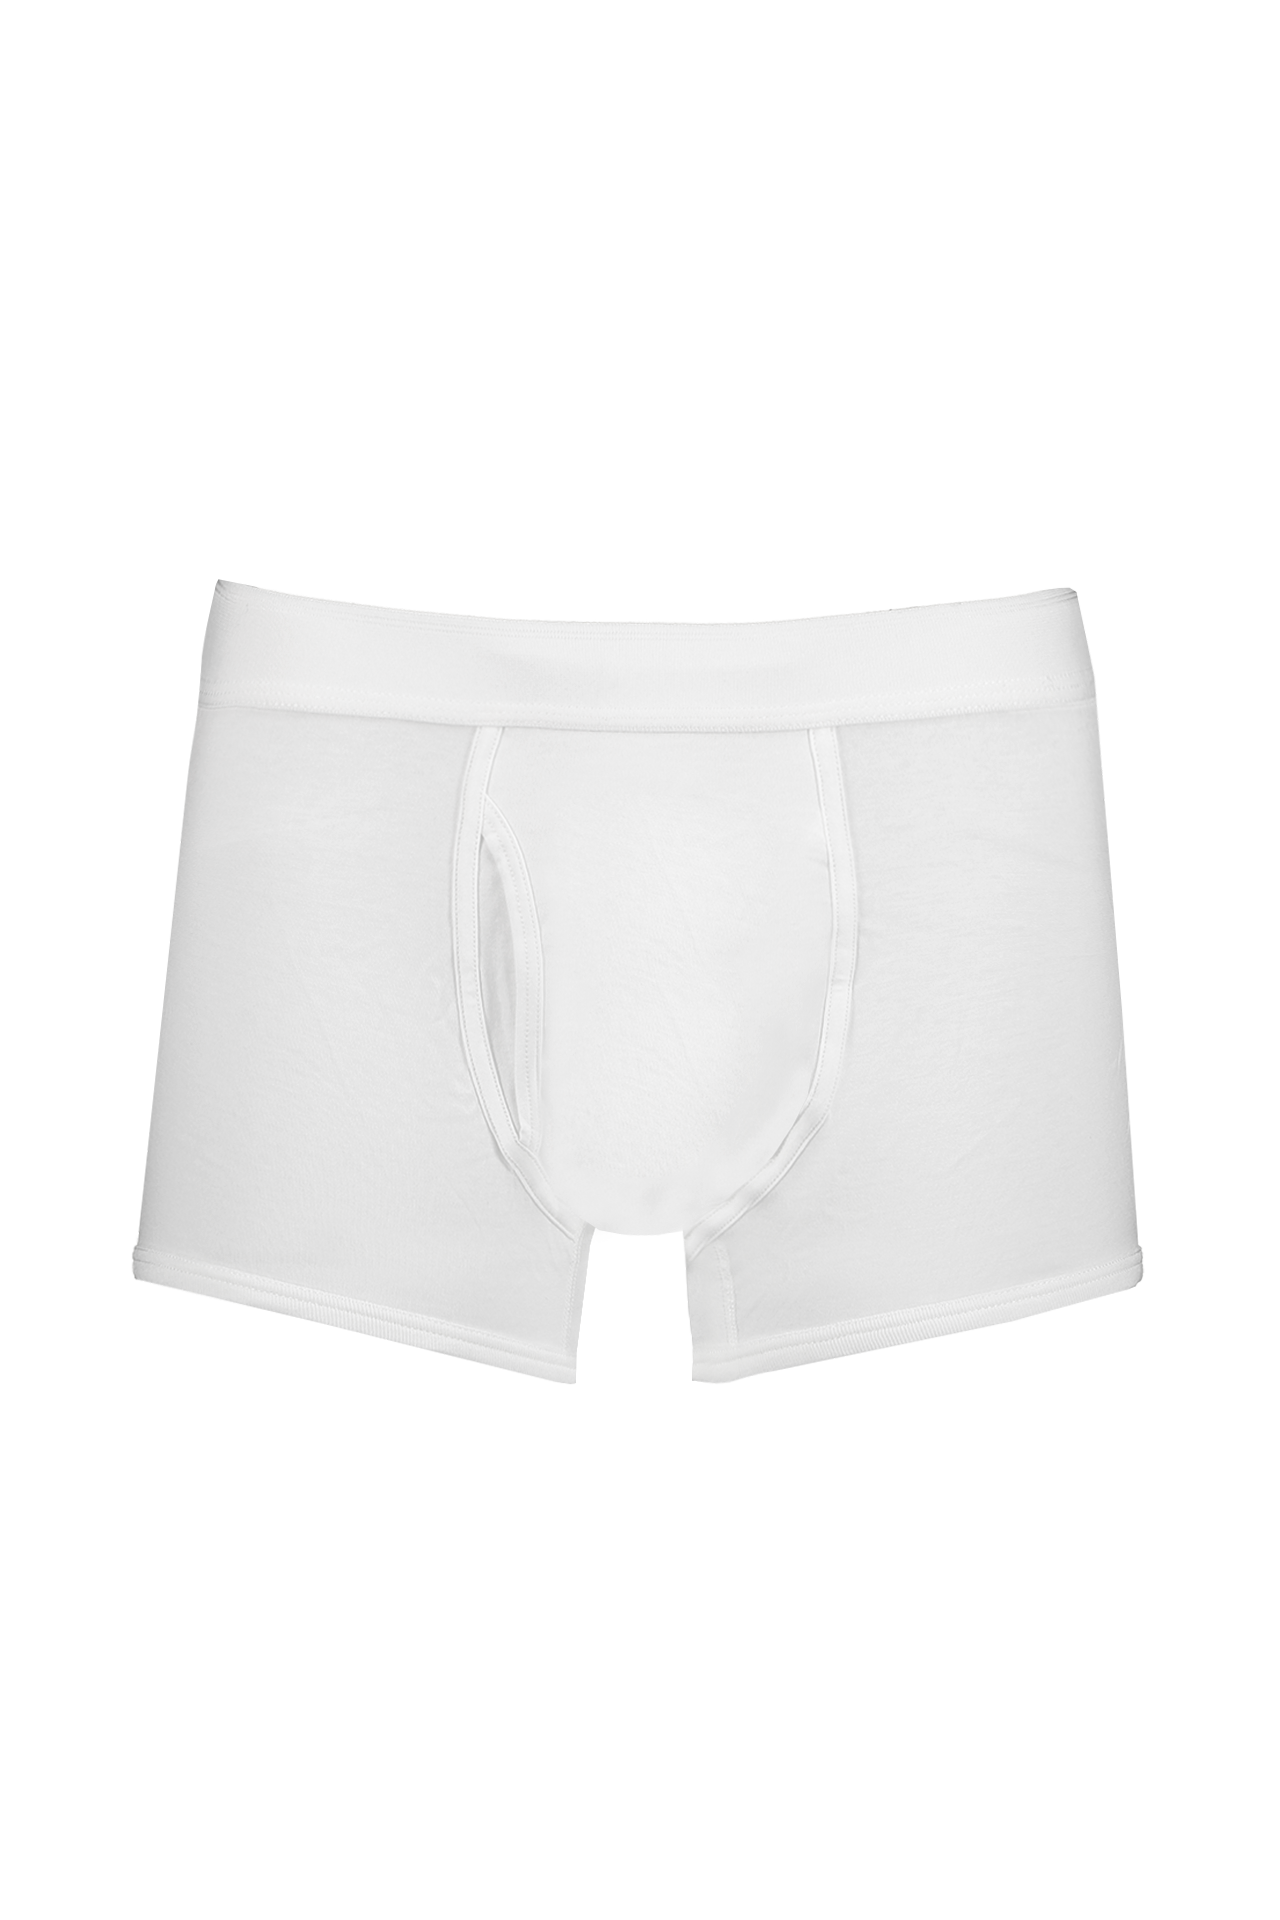 Sunspel Superfine Trunk White Boxers Front Image (4441559859315)